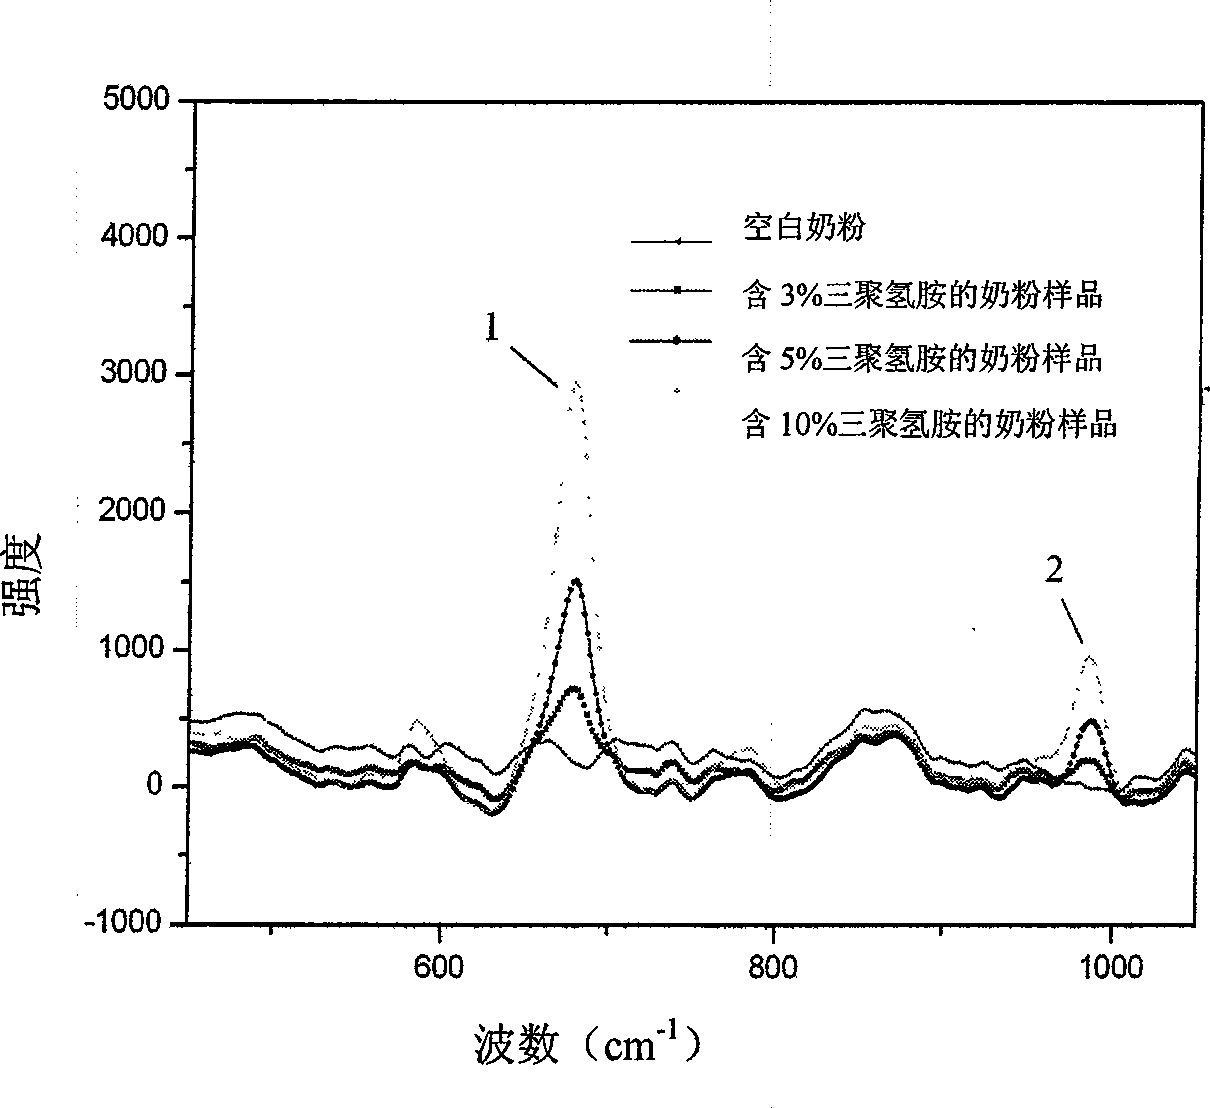 Method for measuring melamine content in solid example